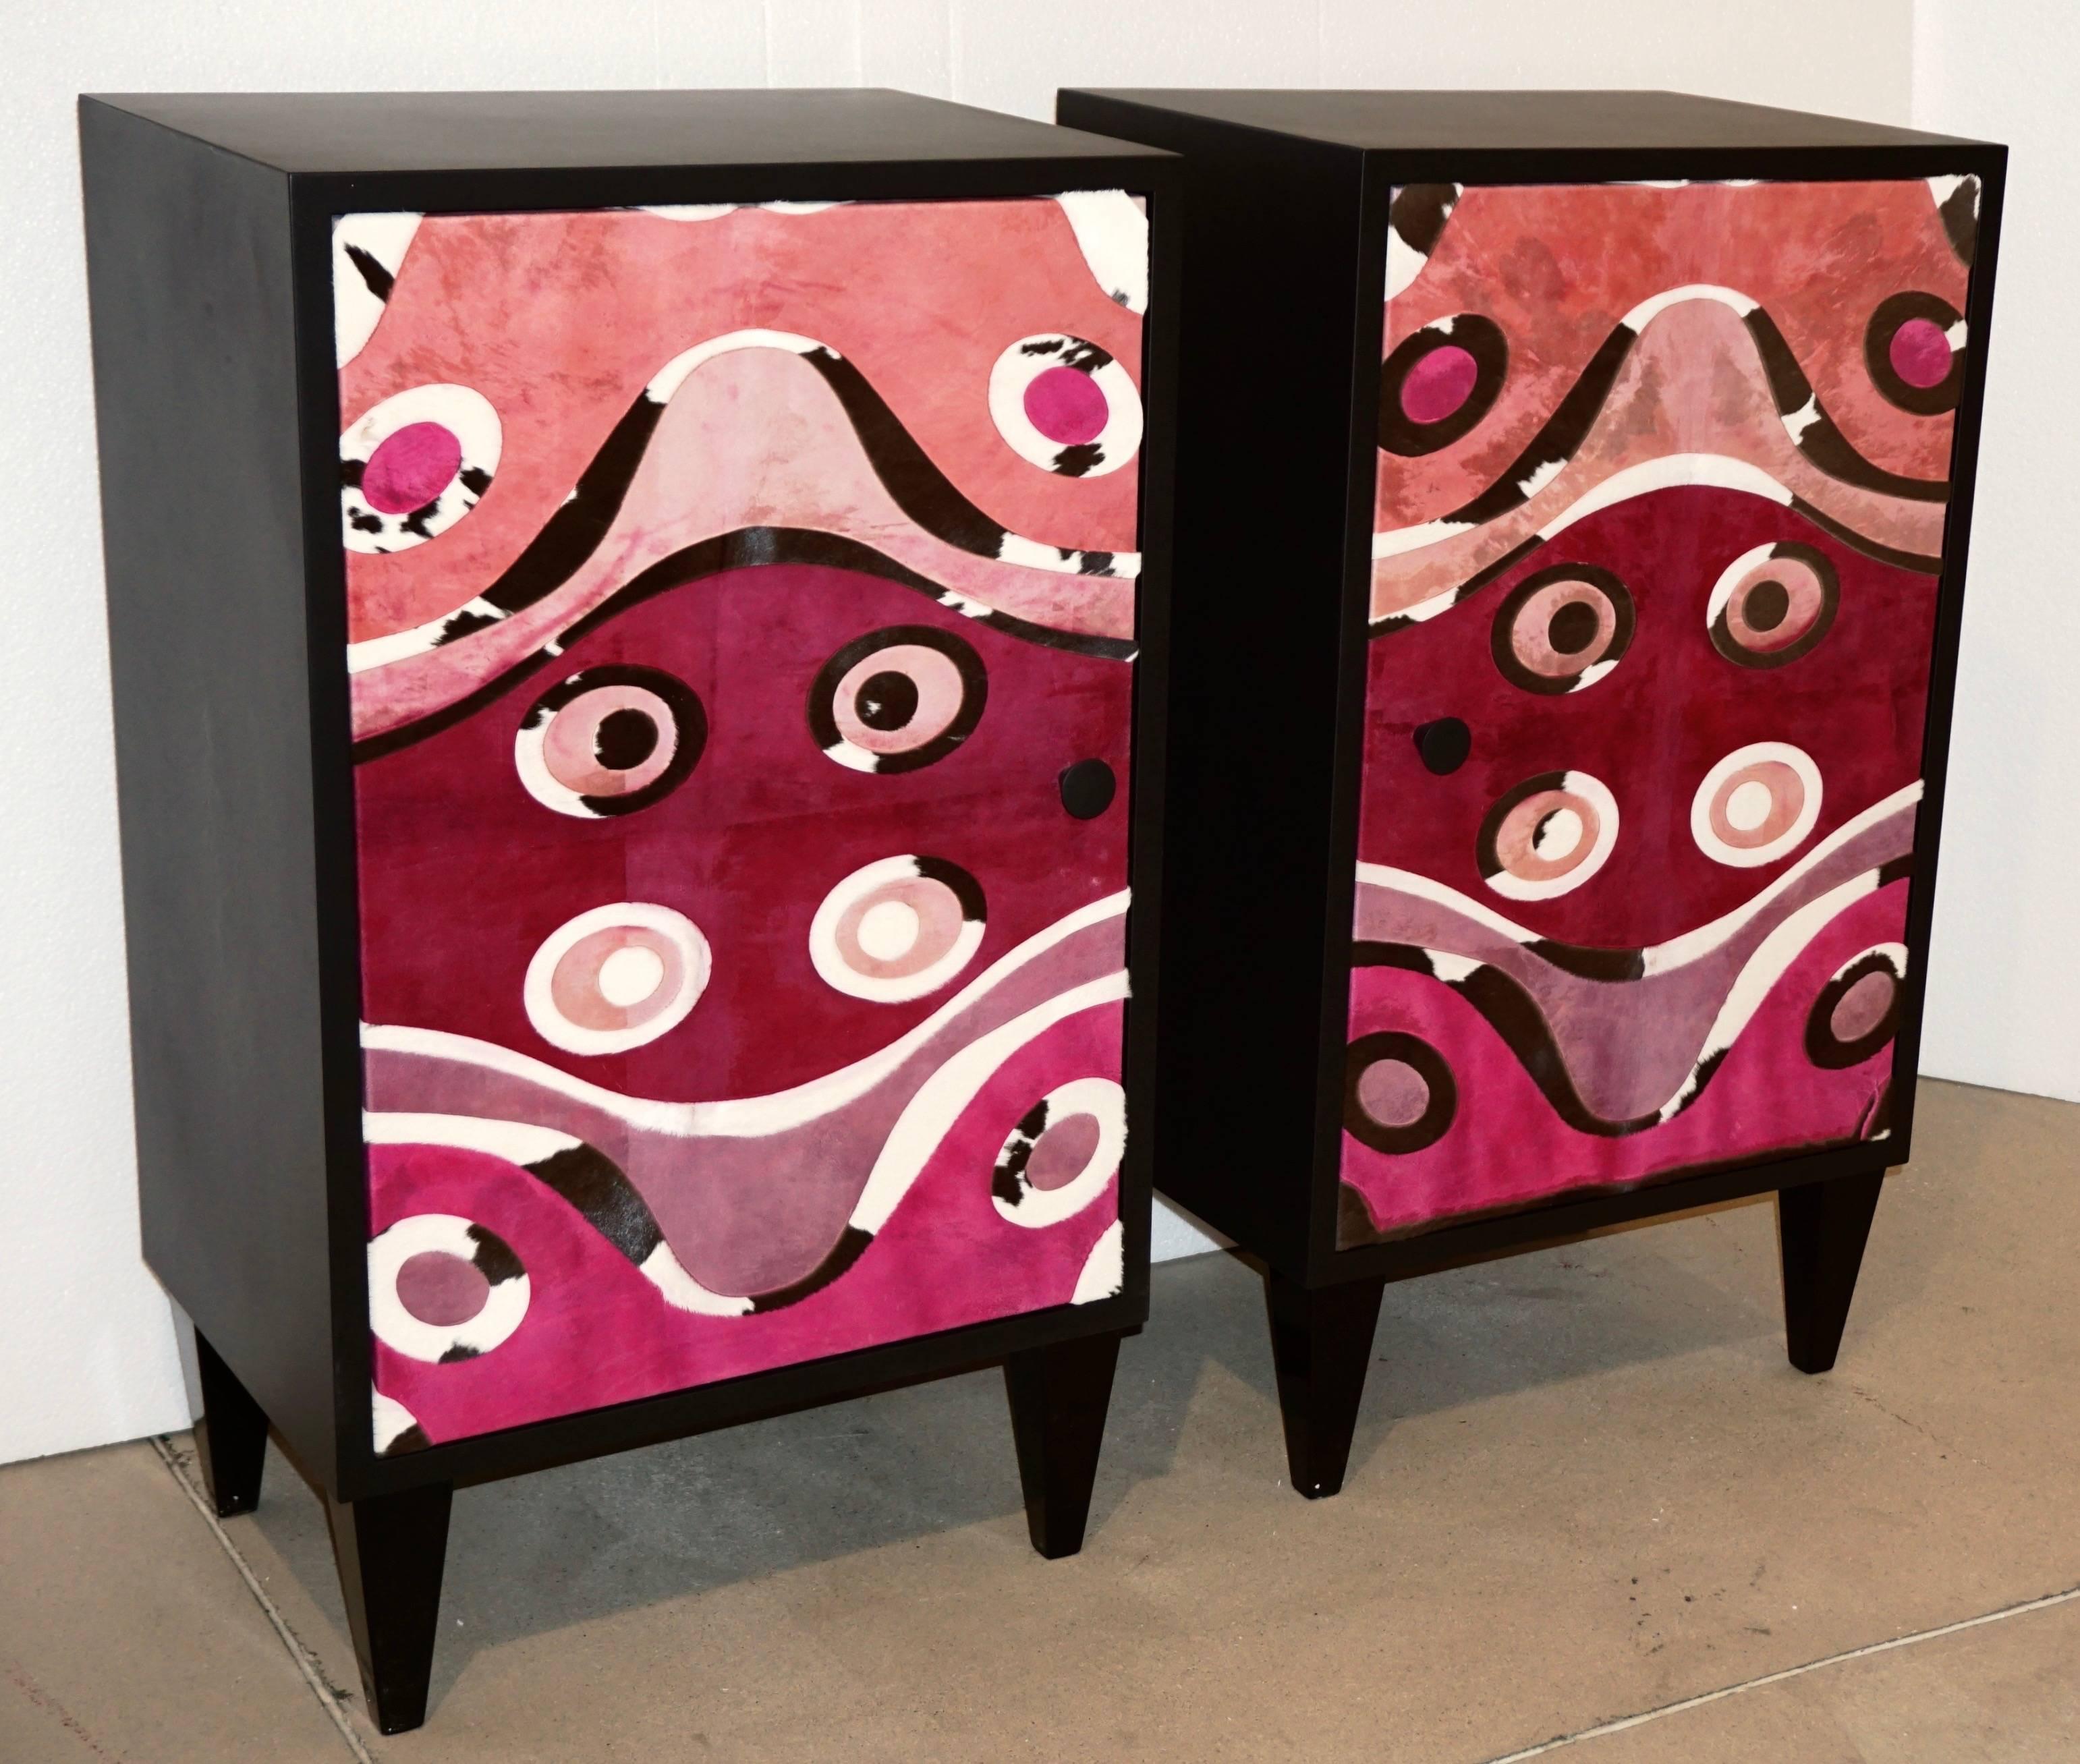 Contemporary fine design Italian pair of satin black lacquered side cabinets or nightstands raised on tapering wood legs, entirely hand made in Italy exclusive to Cosulich Interiors, the front crafted and decorated with a printed modern ethnic